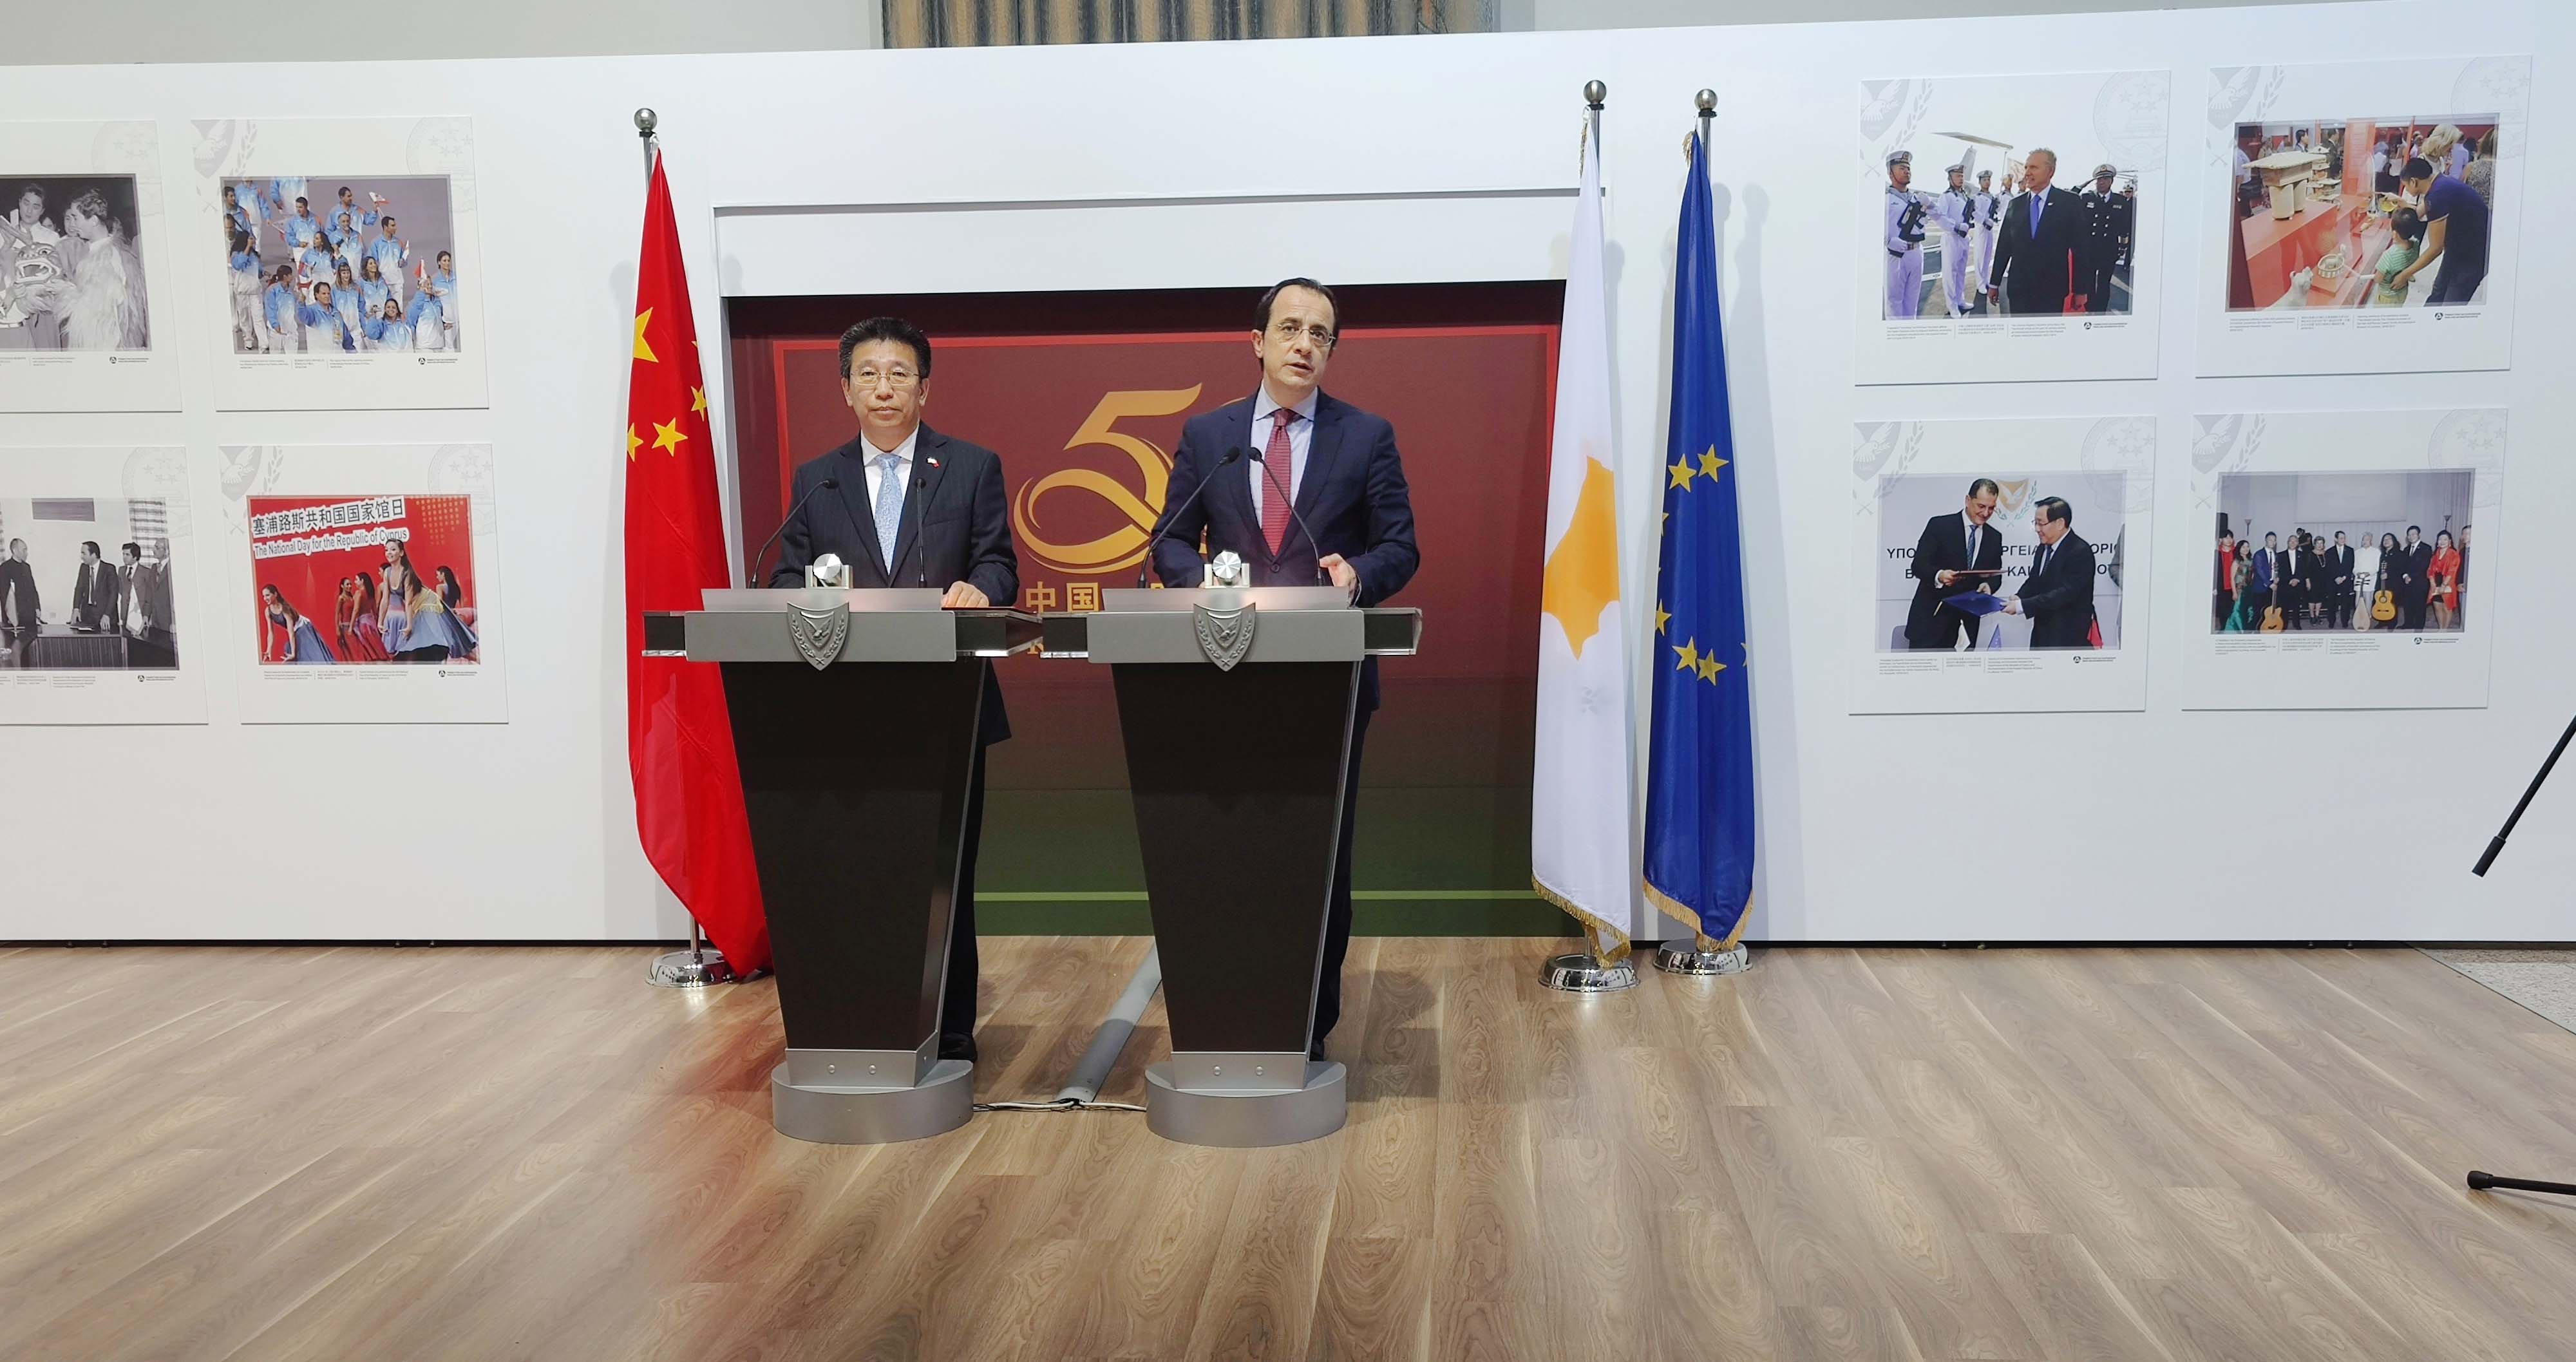 image Fifty years of China-Cyprus relations marked with photo exhibition